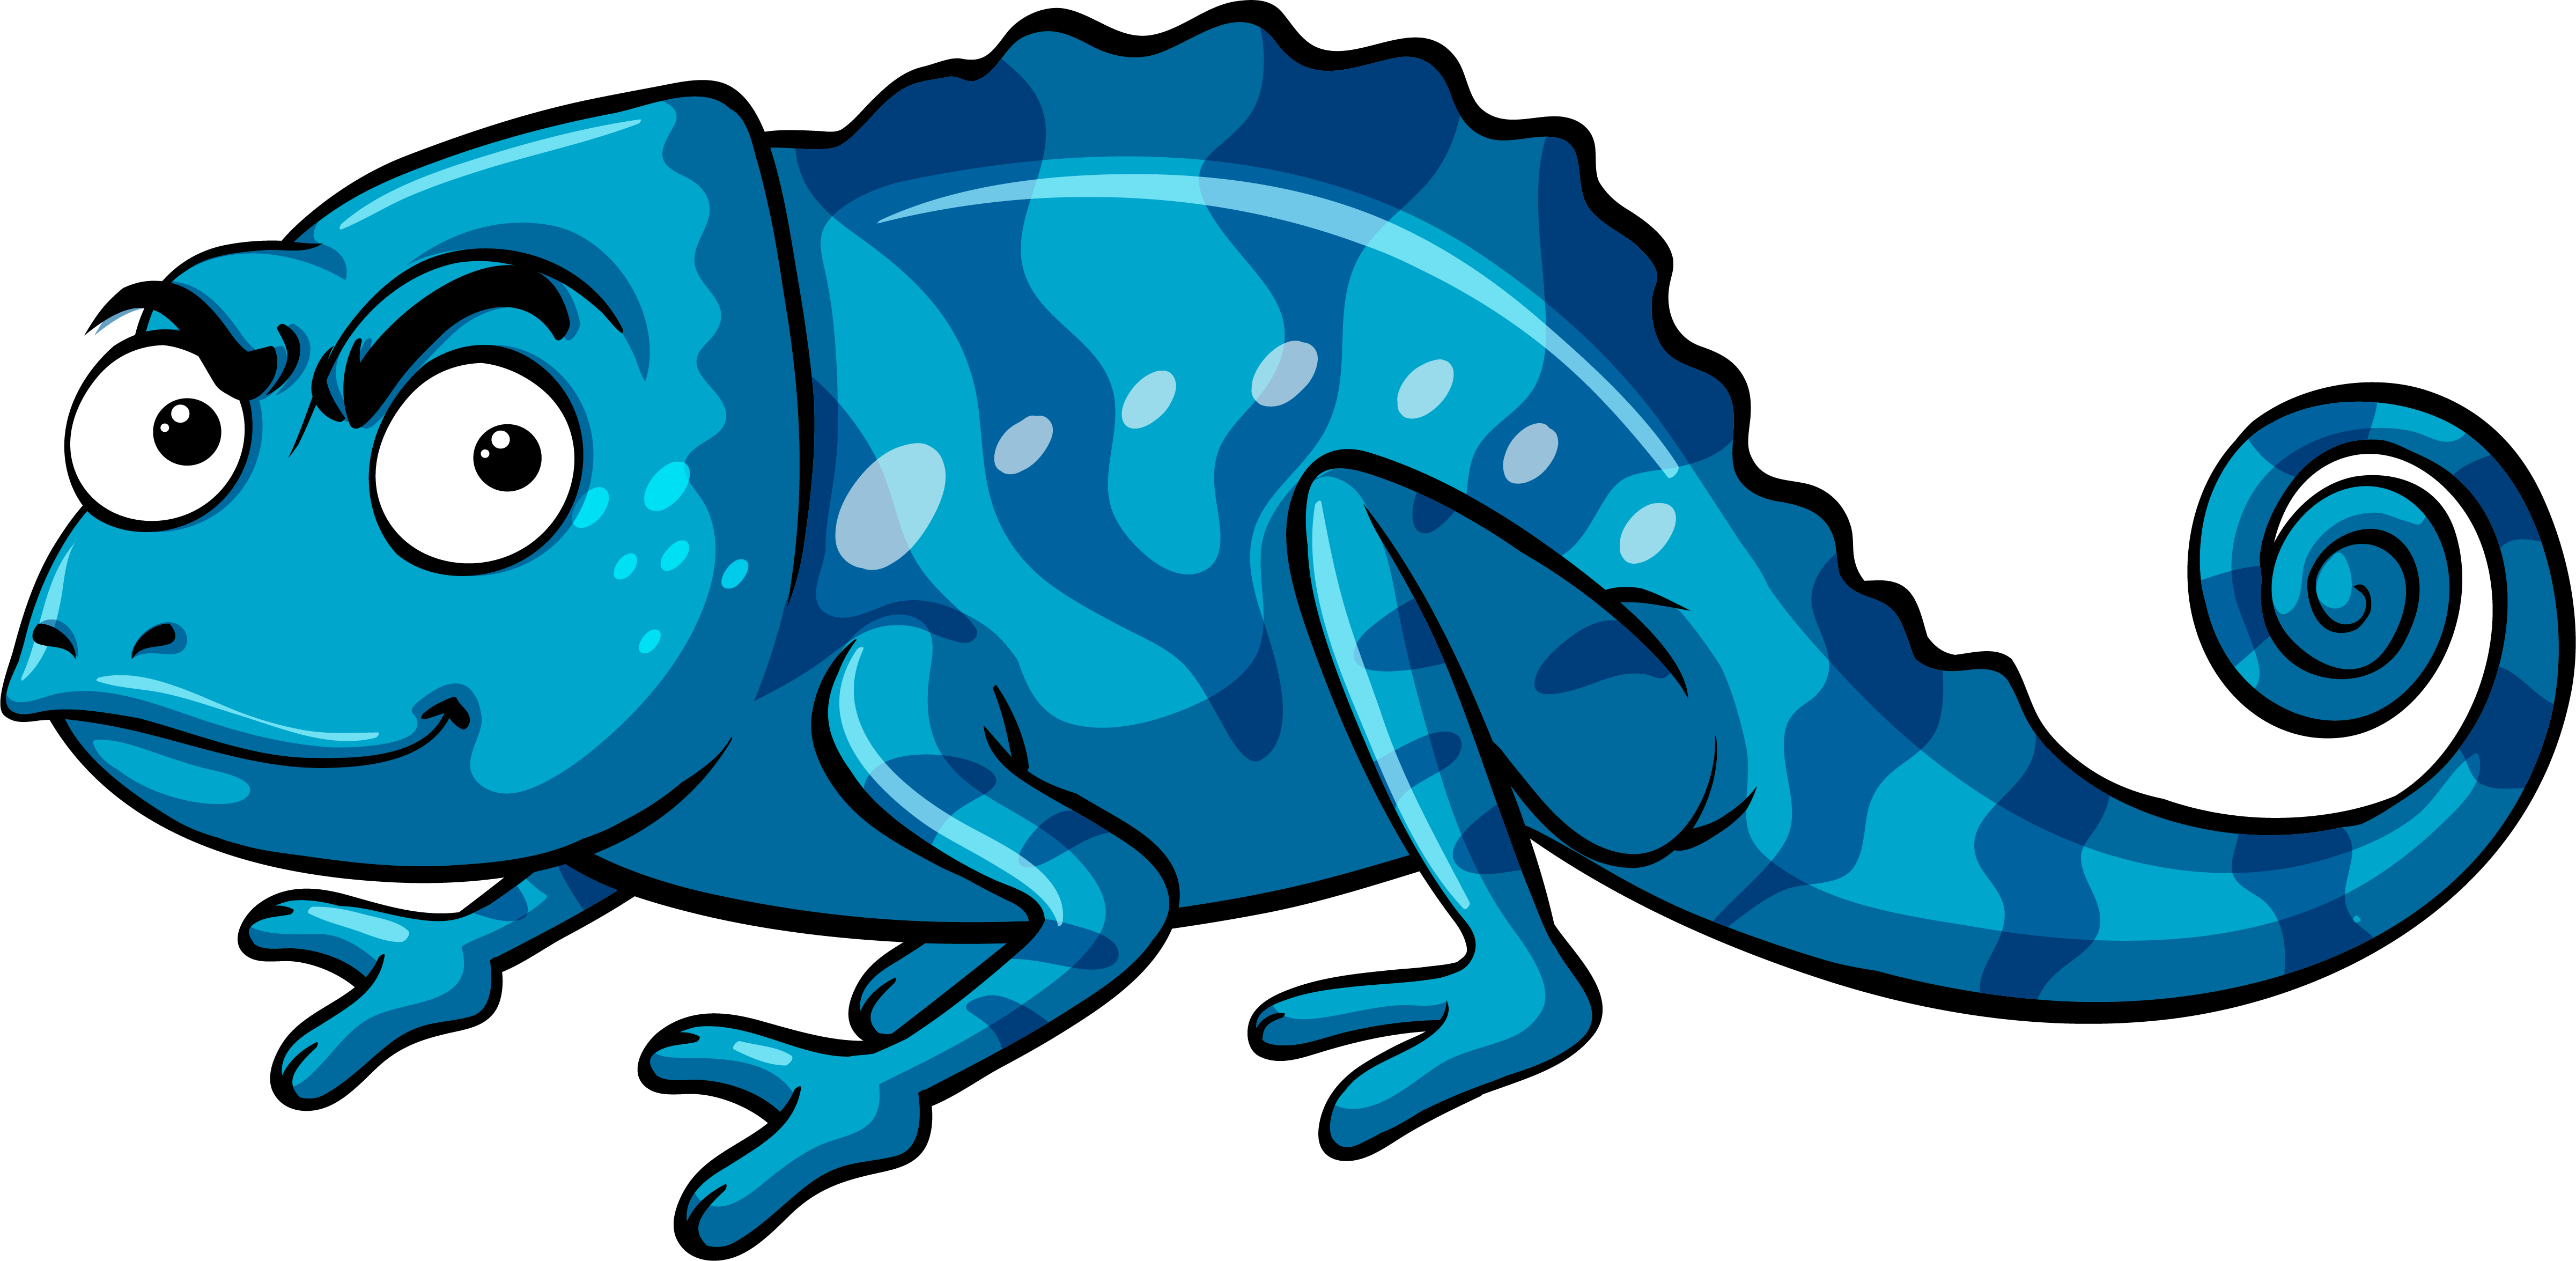 lizard-clipart-blue-lizard-lizard-blue-lizard-transparent-free-for